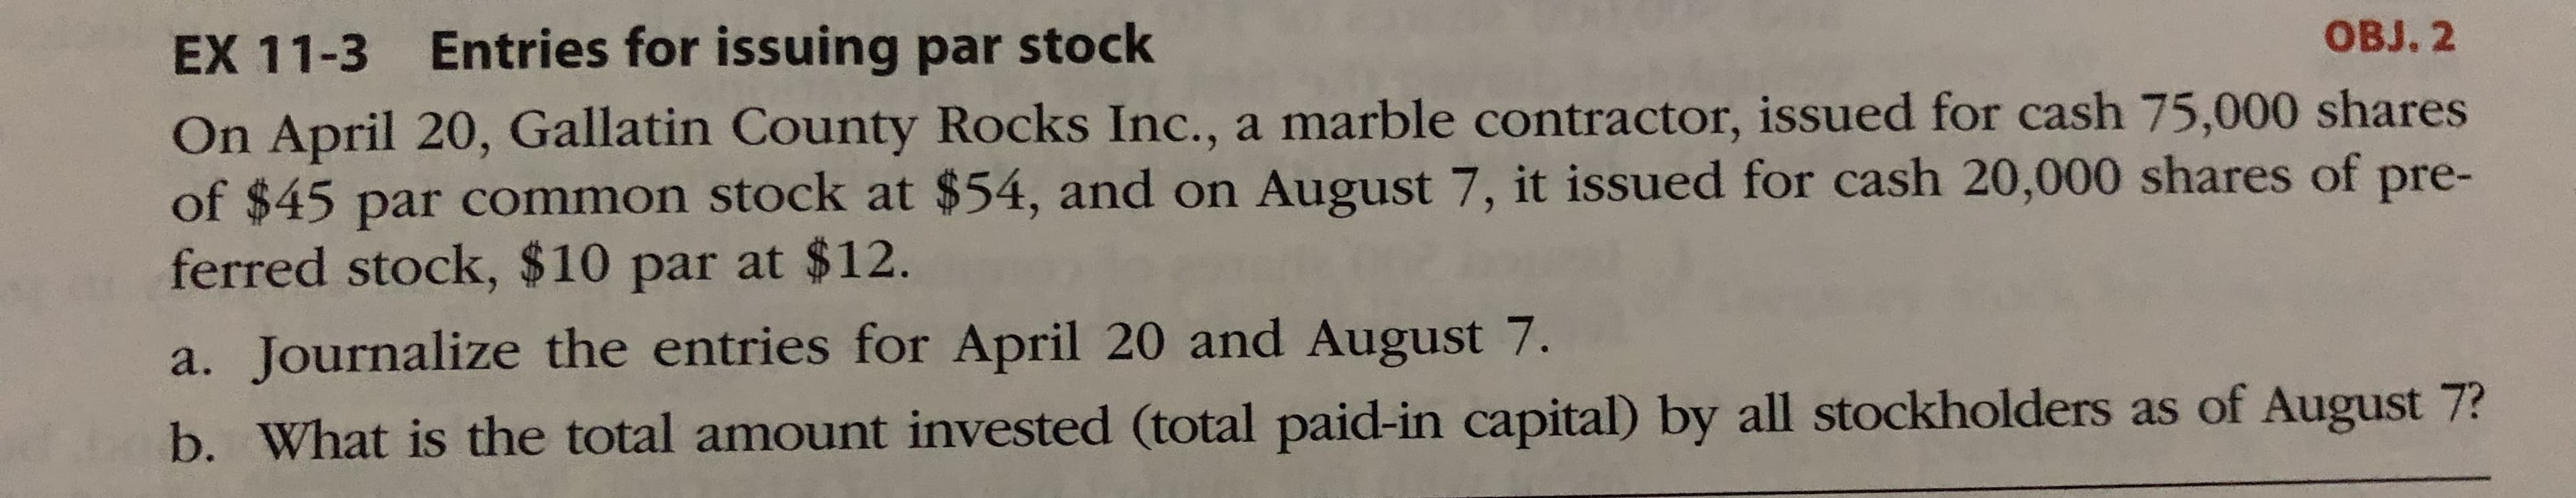 a. Journalize the entries for April 20 and August 7.
b. What is the total amount invested (total paid-in capital) by all stockholders as of August 7?
